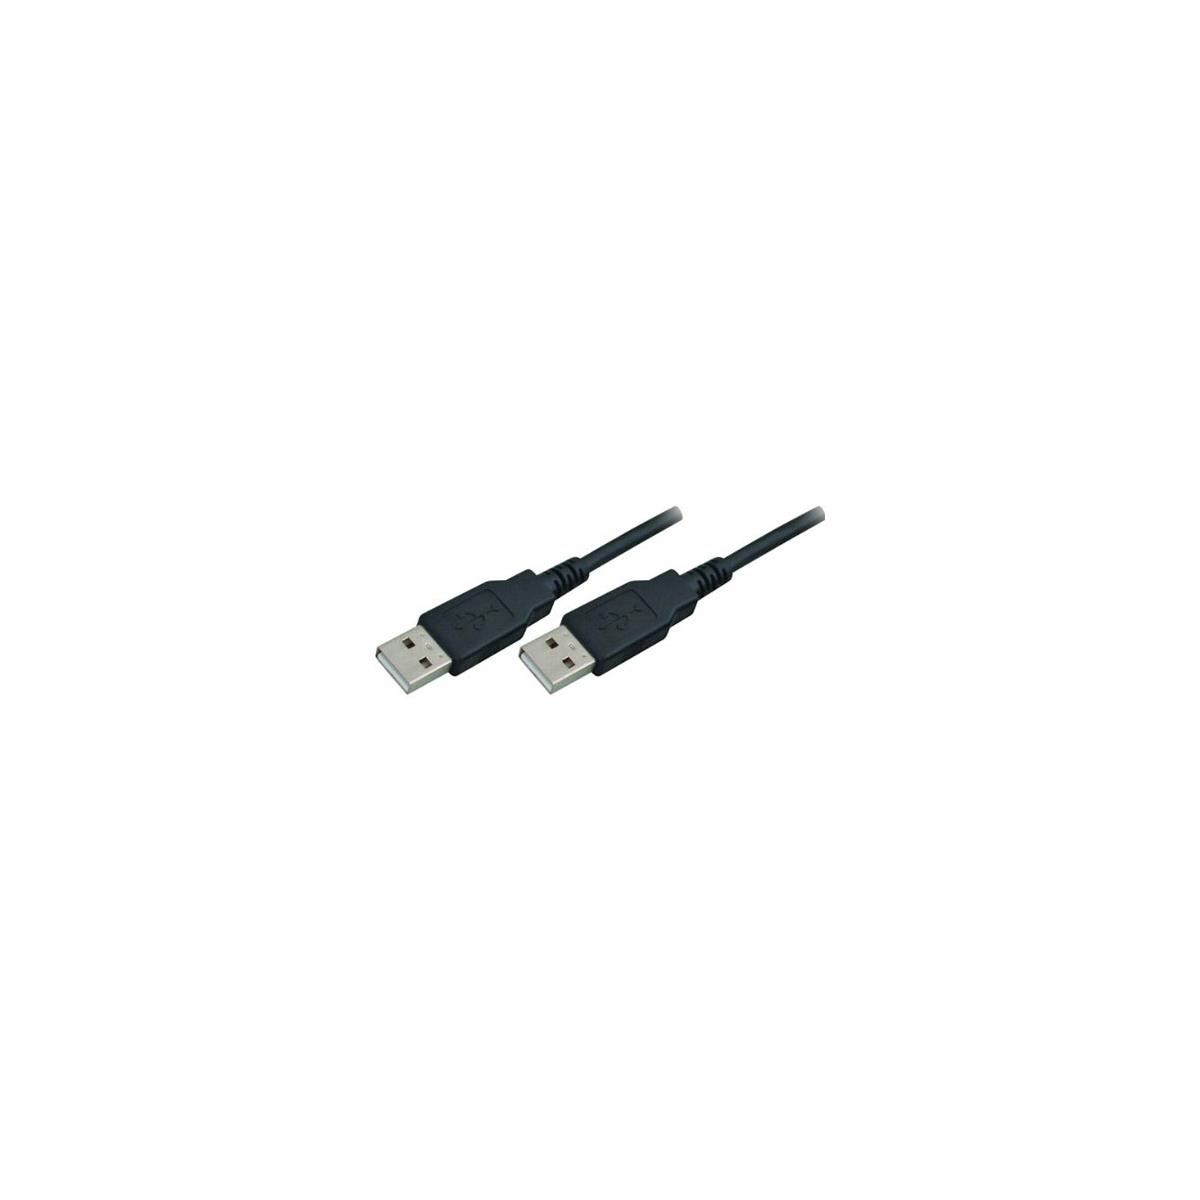 Photos - Other for Computer Comprehensive 15' USB 2.0 A to A Cable USB2-AA-15ST 